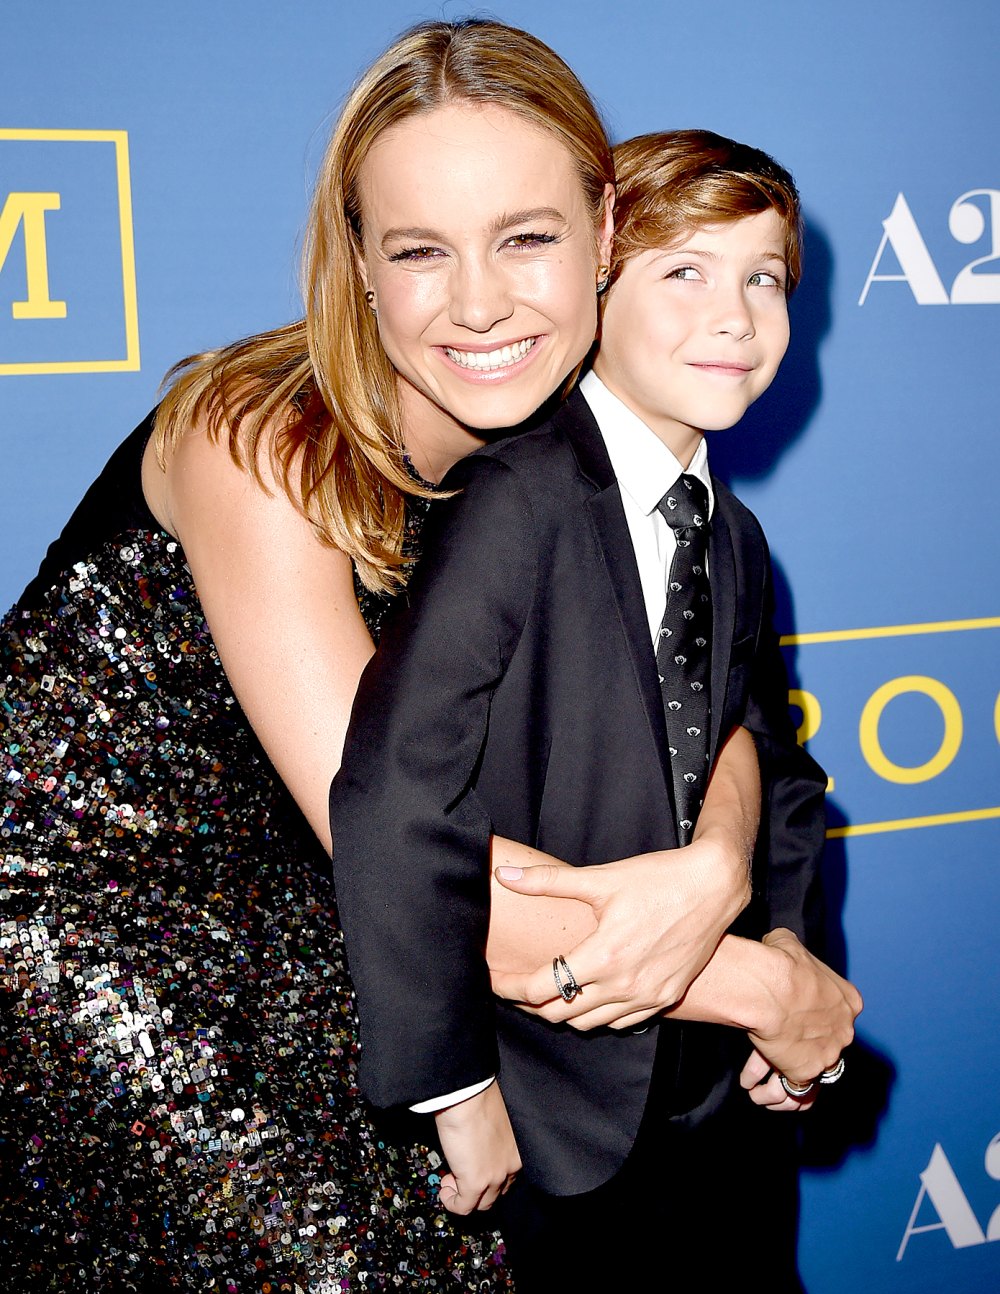 Brie Larson and Jacob Tremblay arrive at the premiere of A24's